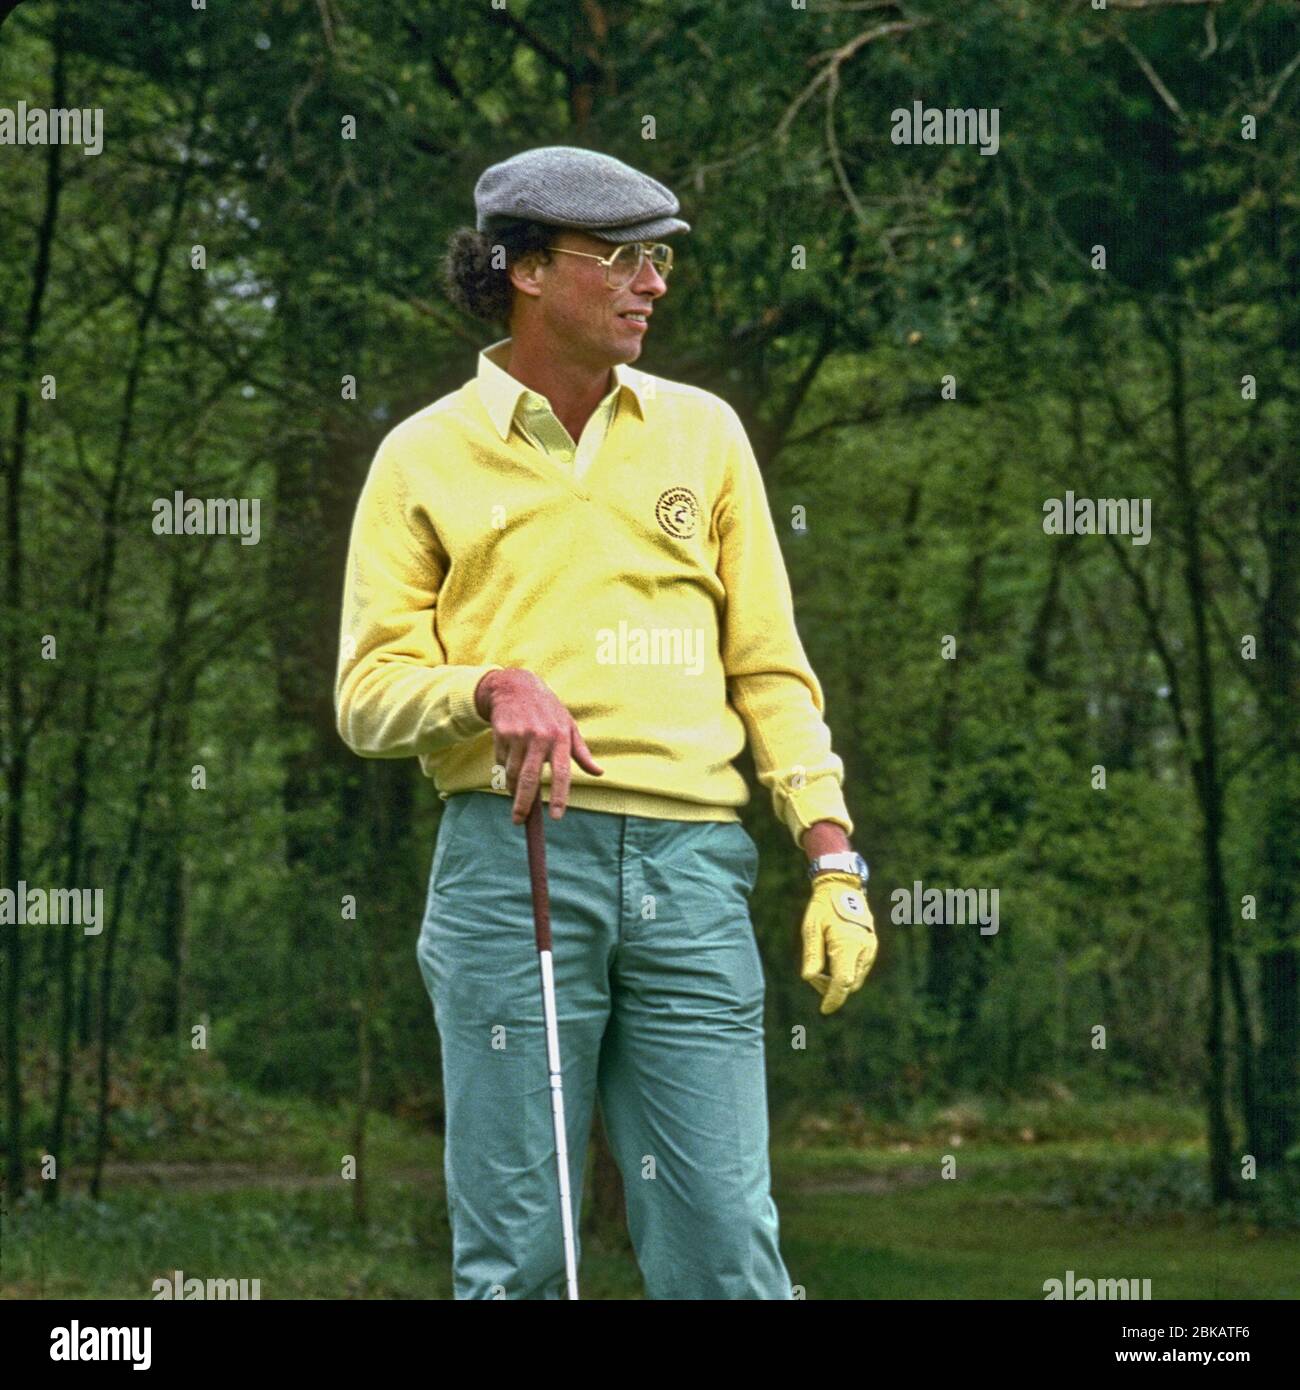 Gilles Hennessy playing golf near Paris; Mr. Gilles Hennessy serves as an Executive Vice President of Commercial at Moet Hennessy Wines & Spirits. Stock Photo